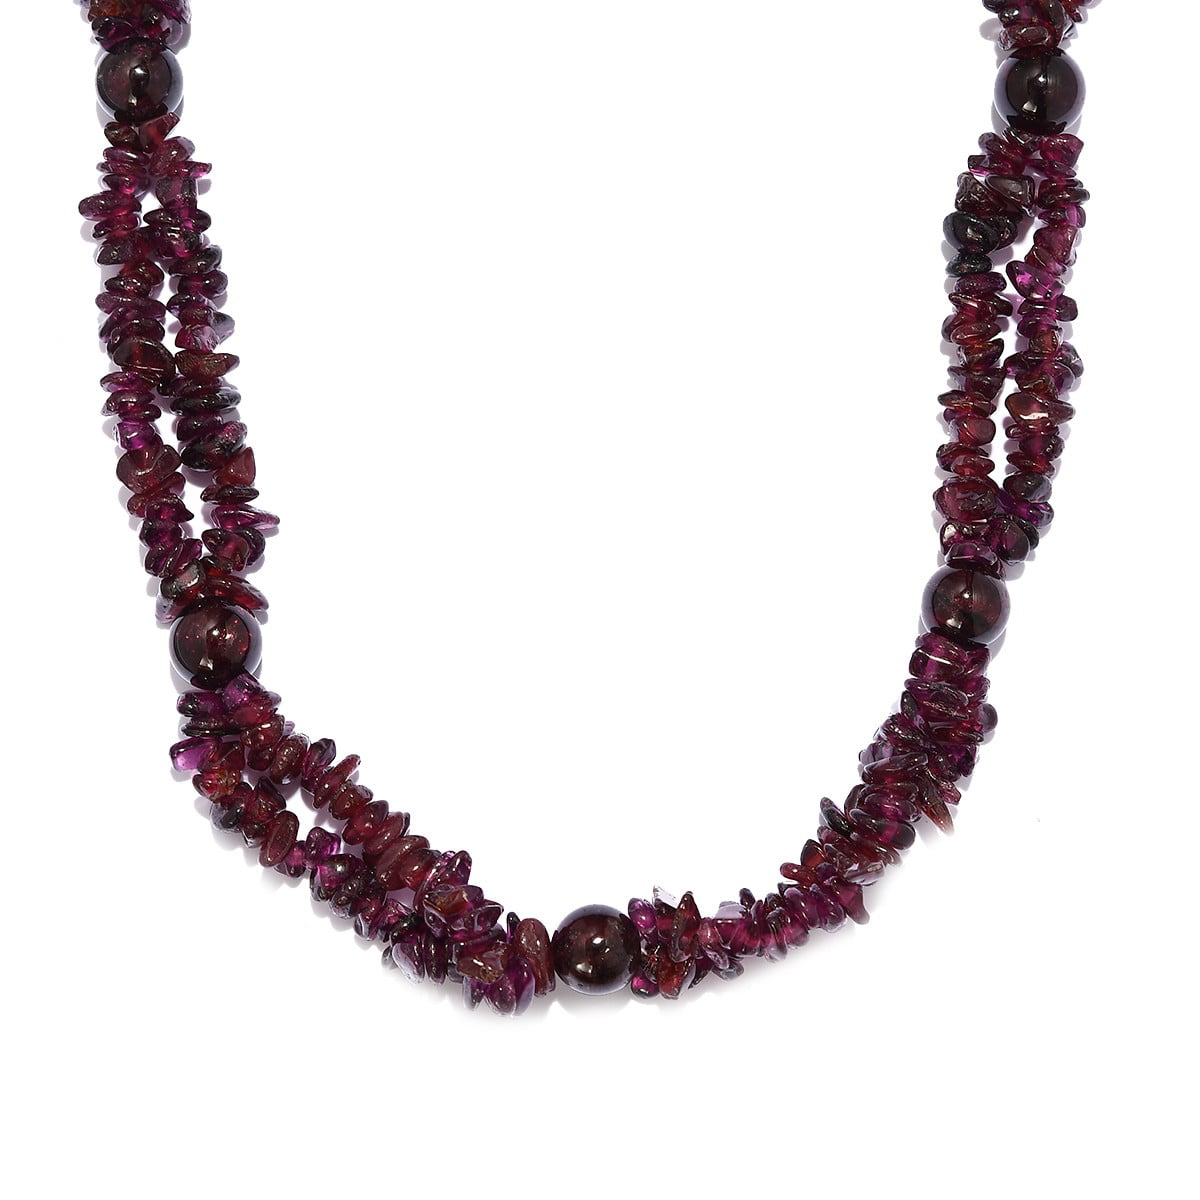 Natural Red Garnet Stone Healing Beaded Fashion Jewelry Necklace 19" 20" GIft 